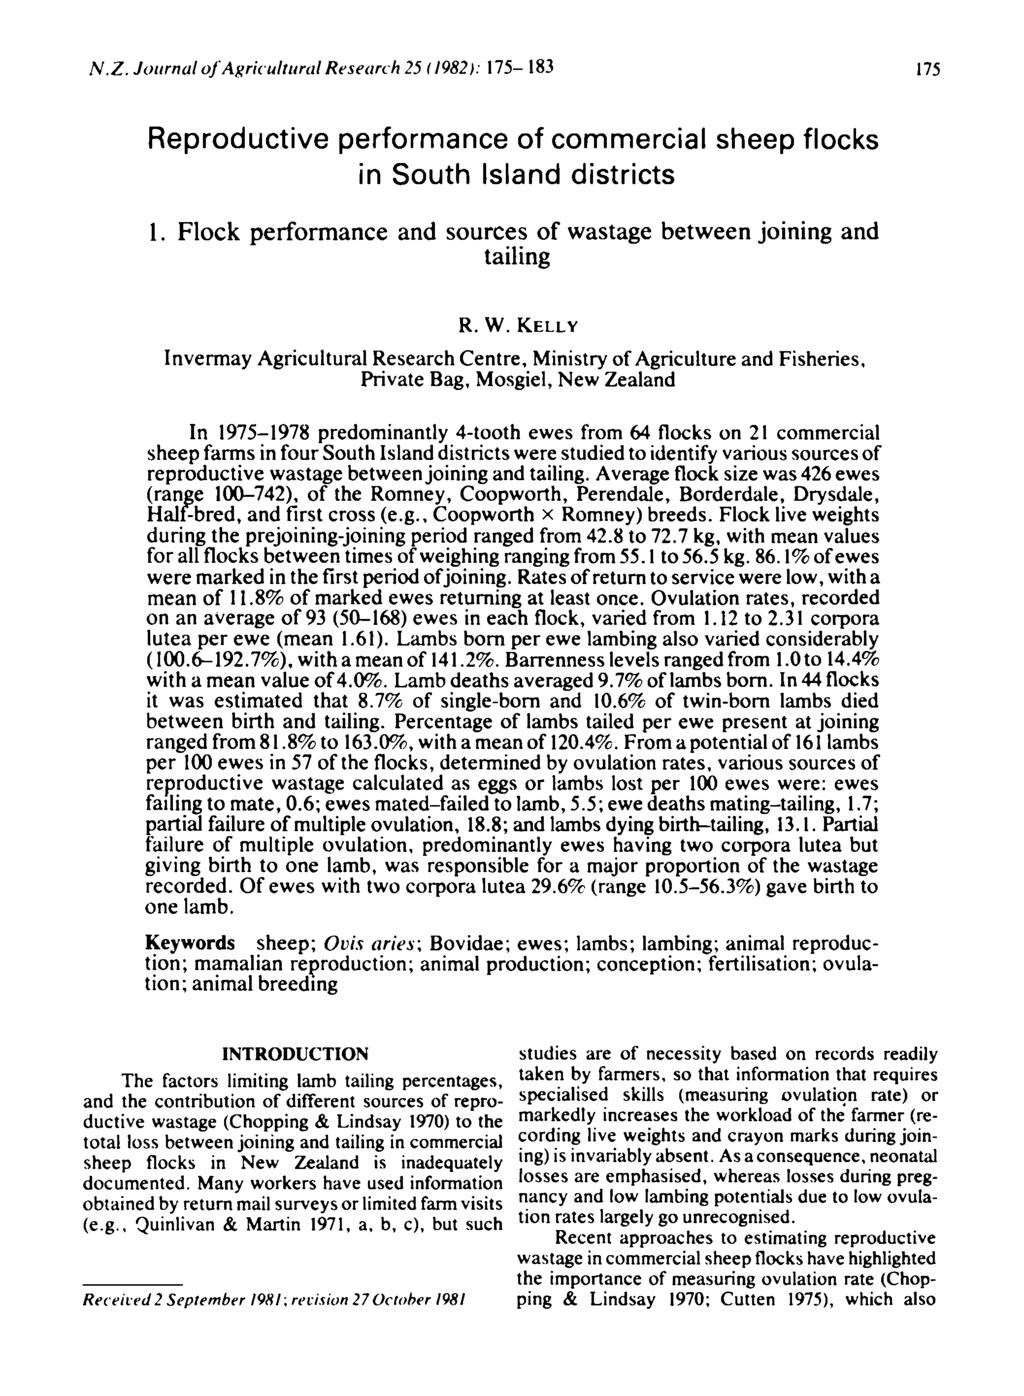 N.Z. Journal of Agricultural Research 25 (1982): 175-183 175 Reproductive performance of commercial sheep flocks in South Island districts 1.